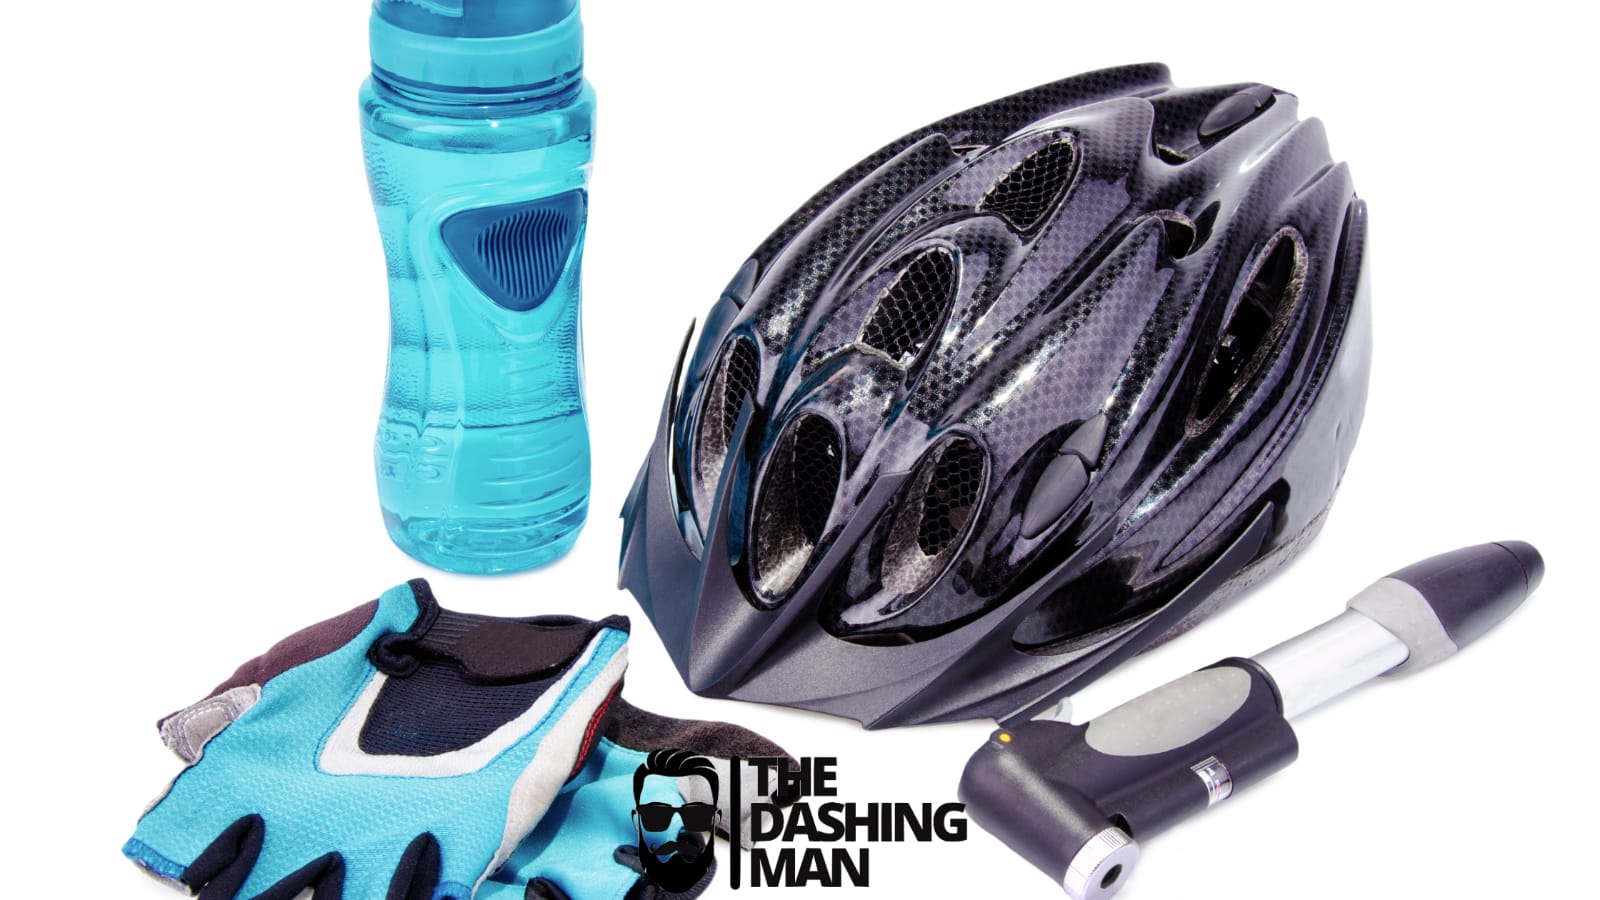 Sports Bicycle Accessories You Need To Have